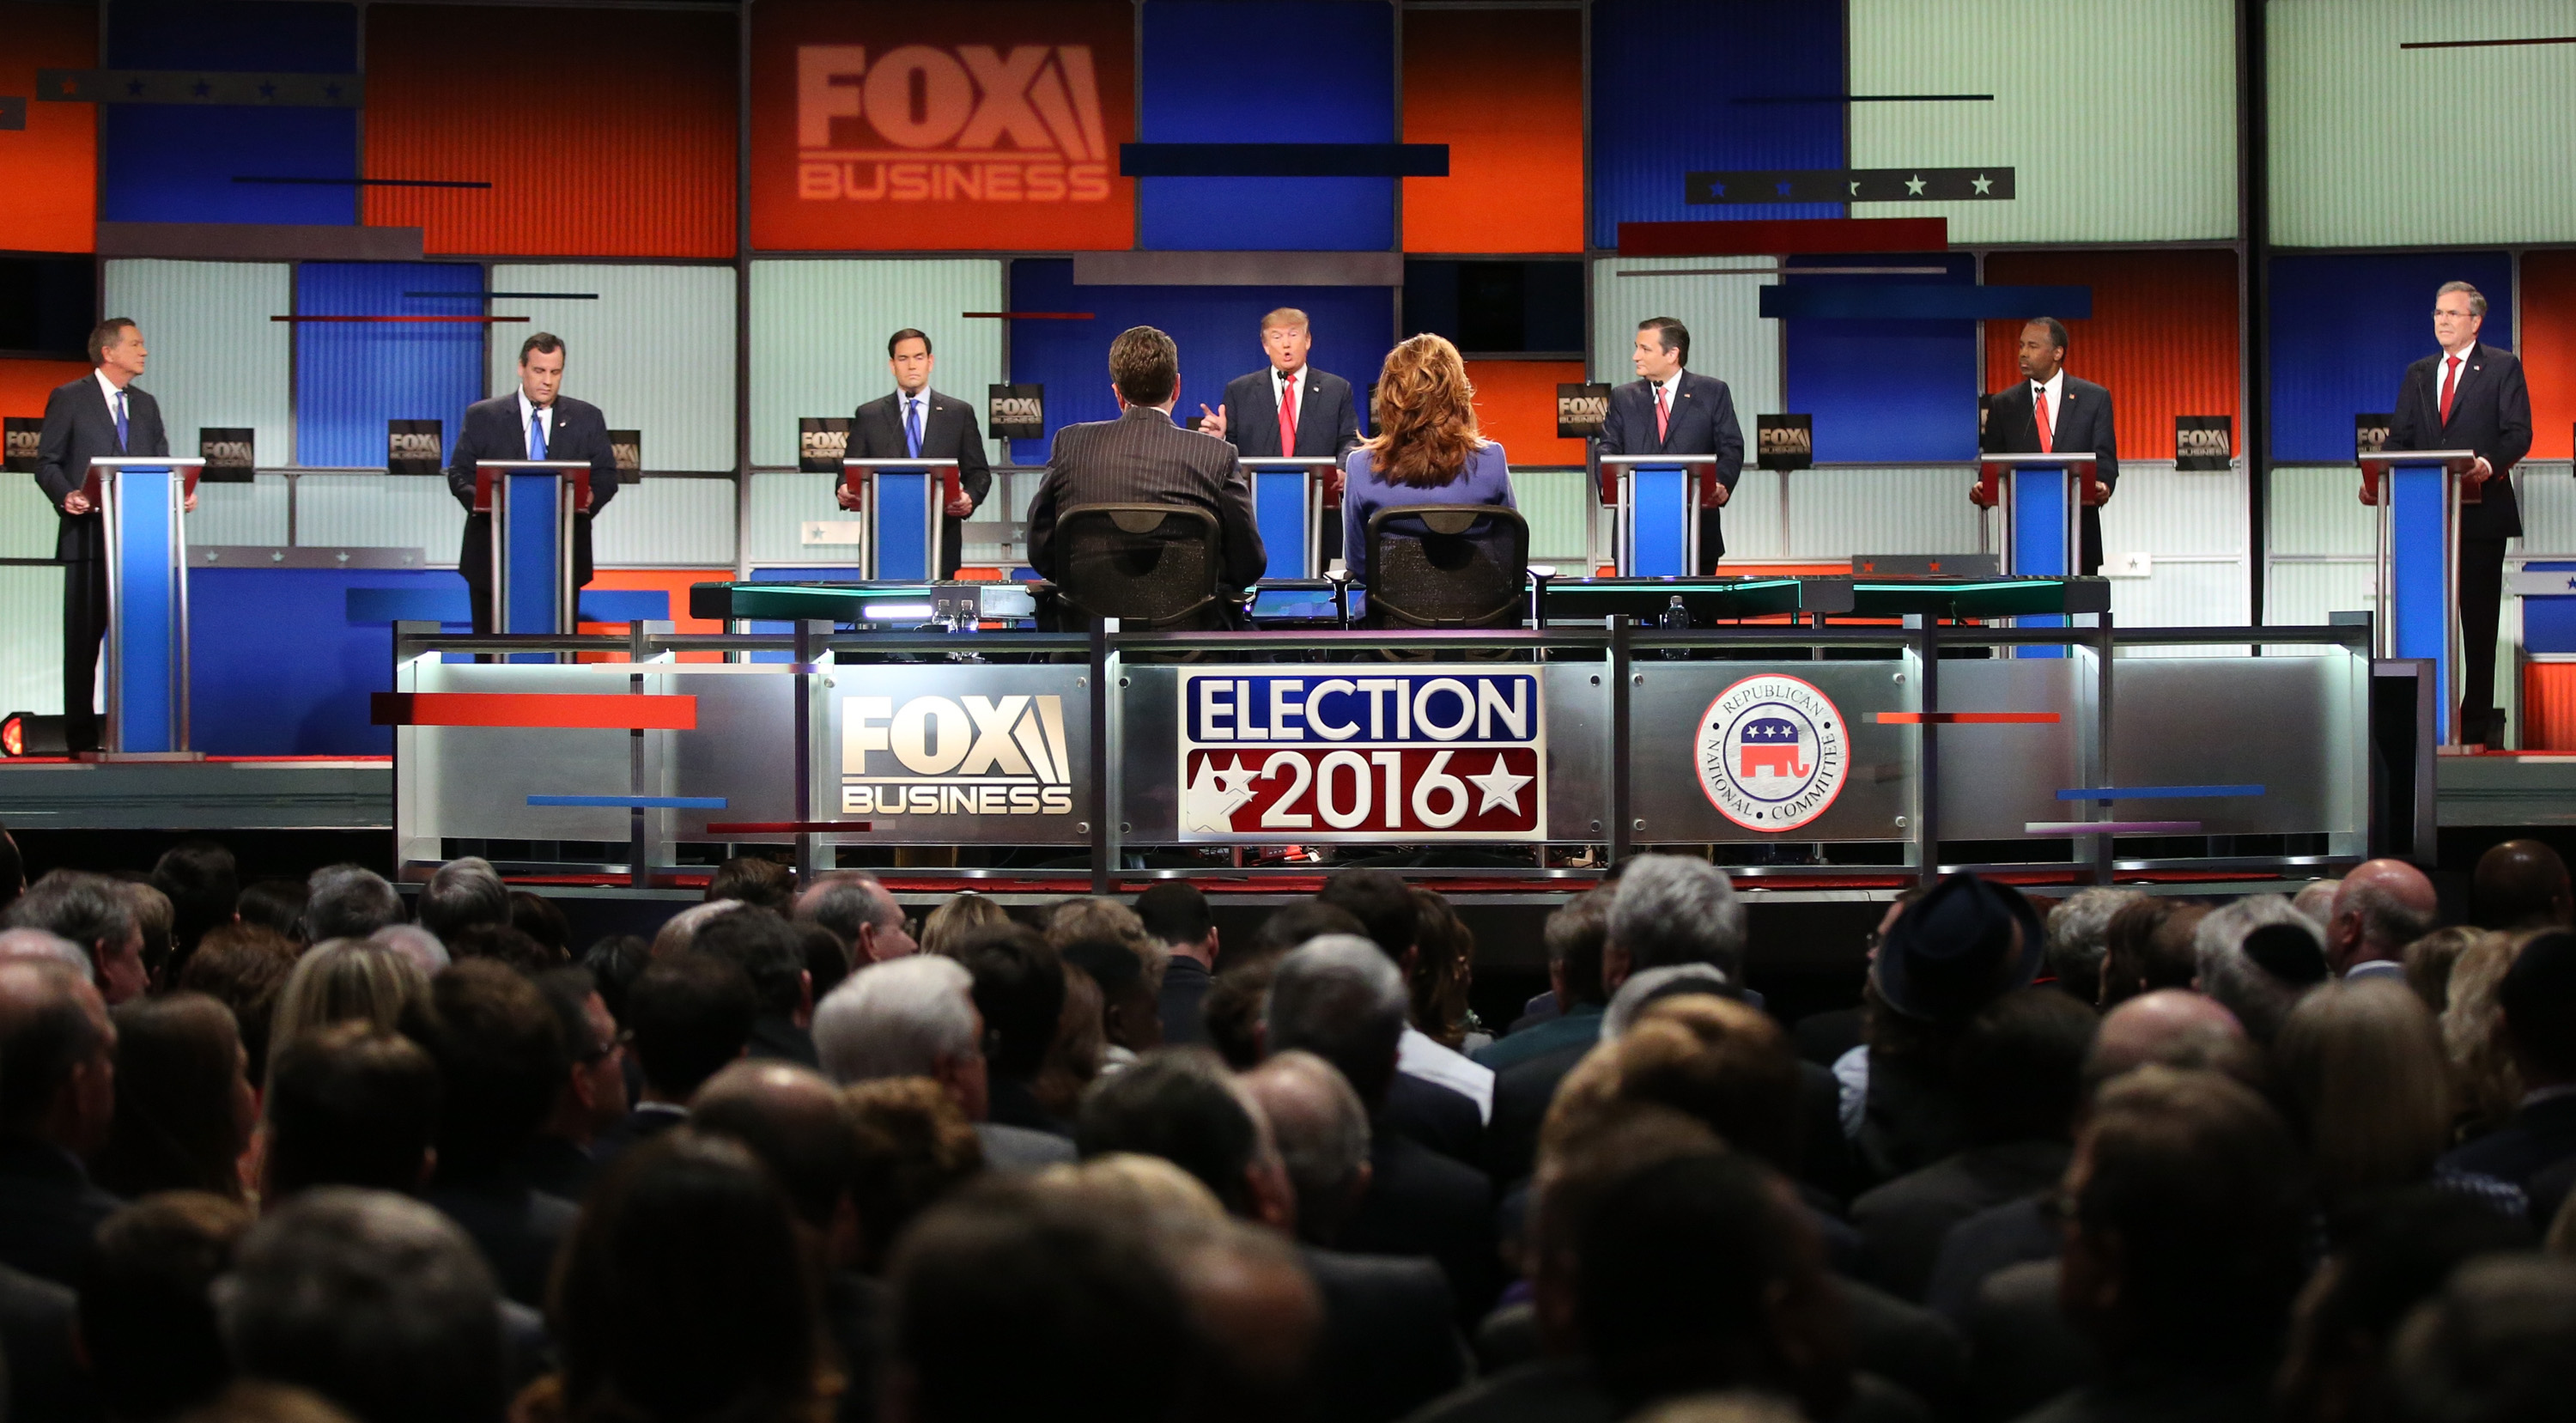 Republican presidential candidates (L-R) Ohio Governor John Kasich, New Jersey Governor Chris Christie, Sen. Marco Rubio (R-FL), Donald Trump, Sen. Ted Cruz (R-TX), Ben Carson and Jeb Bush participate in the Fox Business Network Republican presidential debate at the North Charleston Coliseum and Performing Arts Center on January 14, 2016 in North Charleston, South Carolina. The sixth Republican debate is held in two parts, one main debate for the top seven candidates, and another for three other candidates lower in the current polls. (Scott Olson—Getty Images)